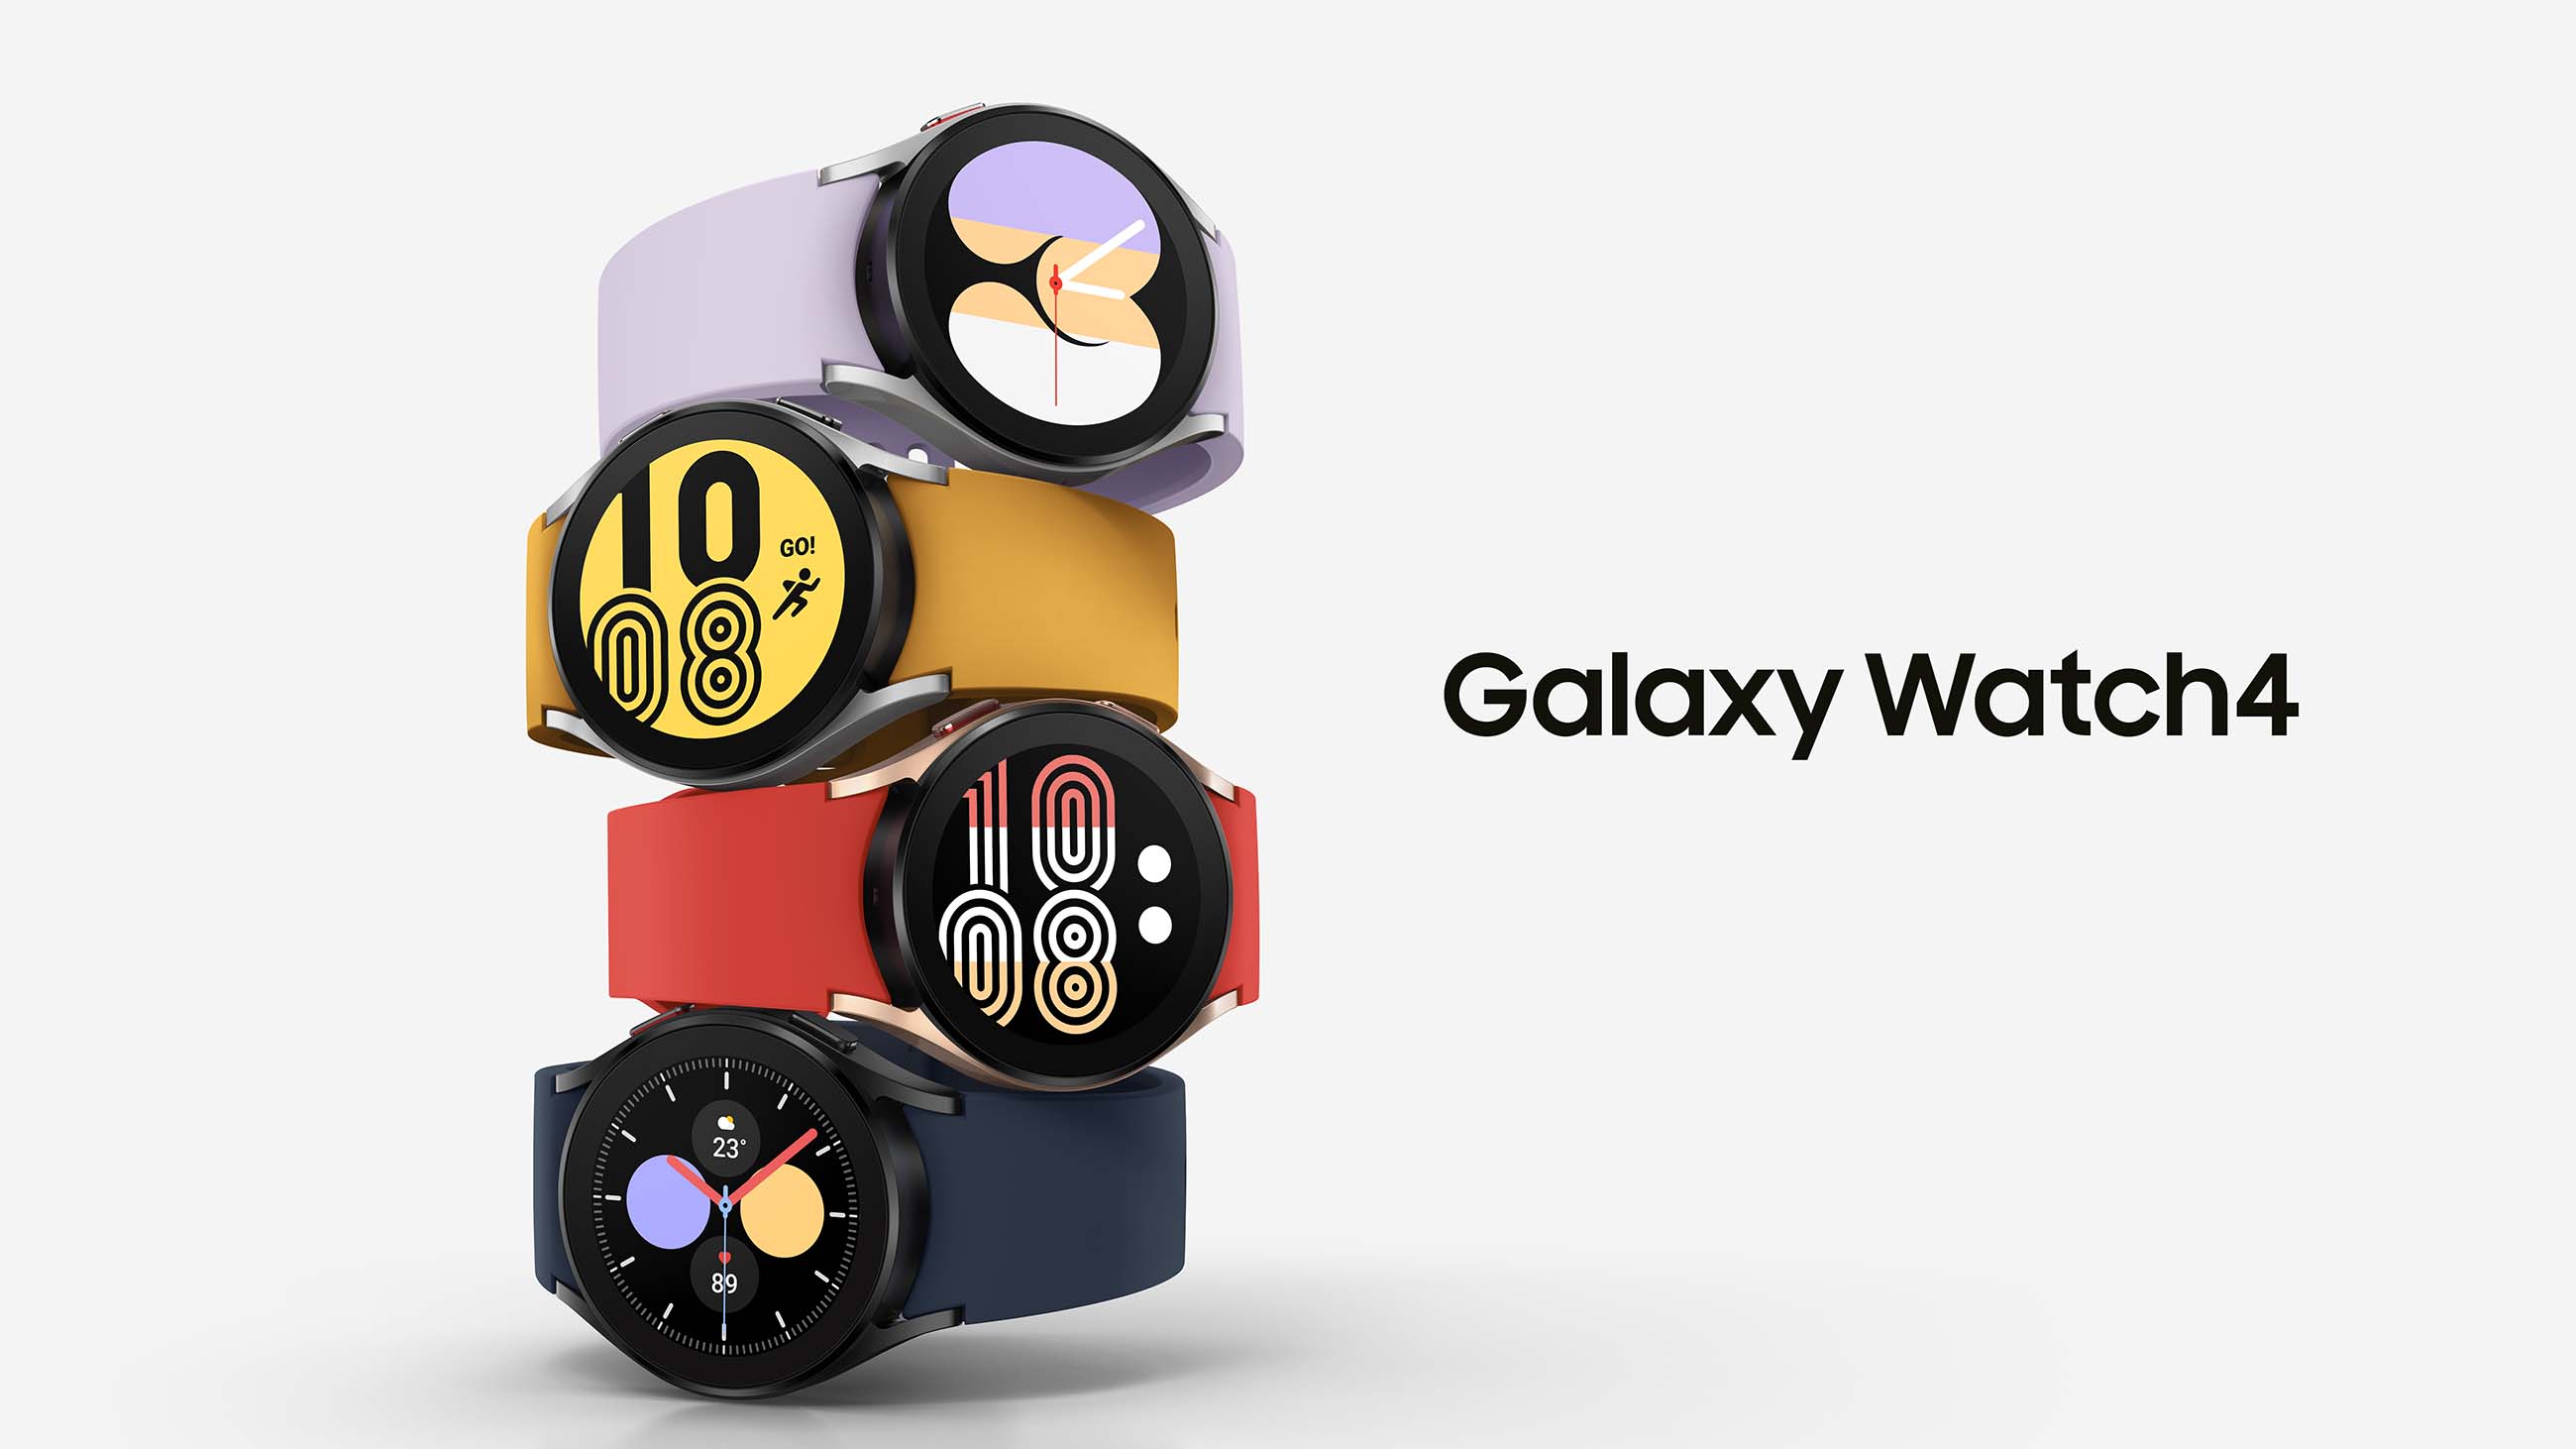 Galaxy Watch 4 smartwatches stacked on top of one another